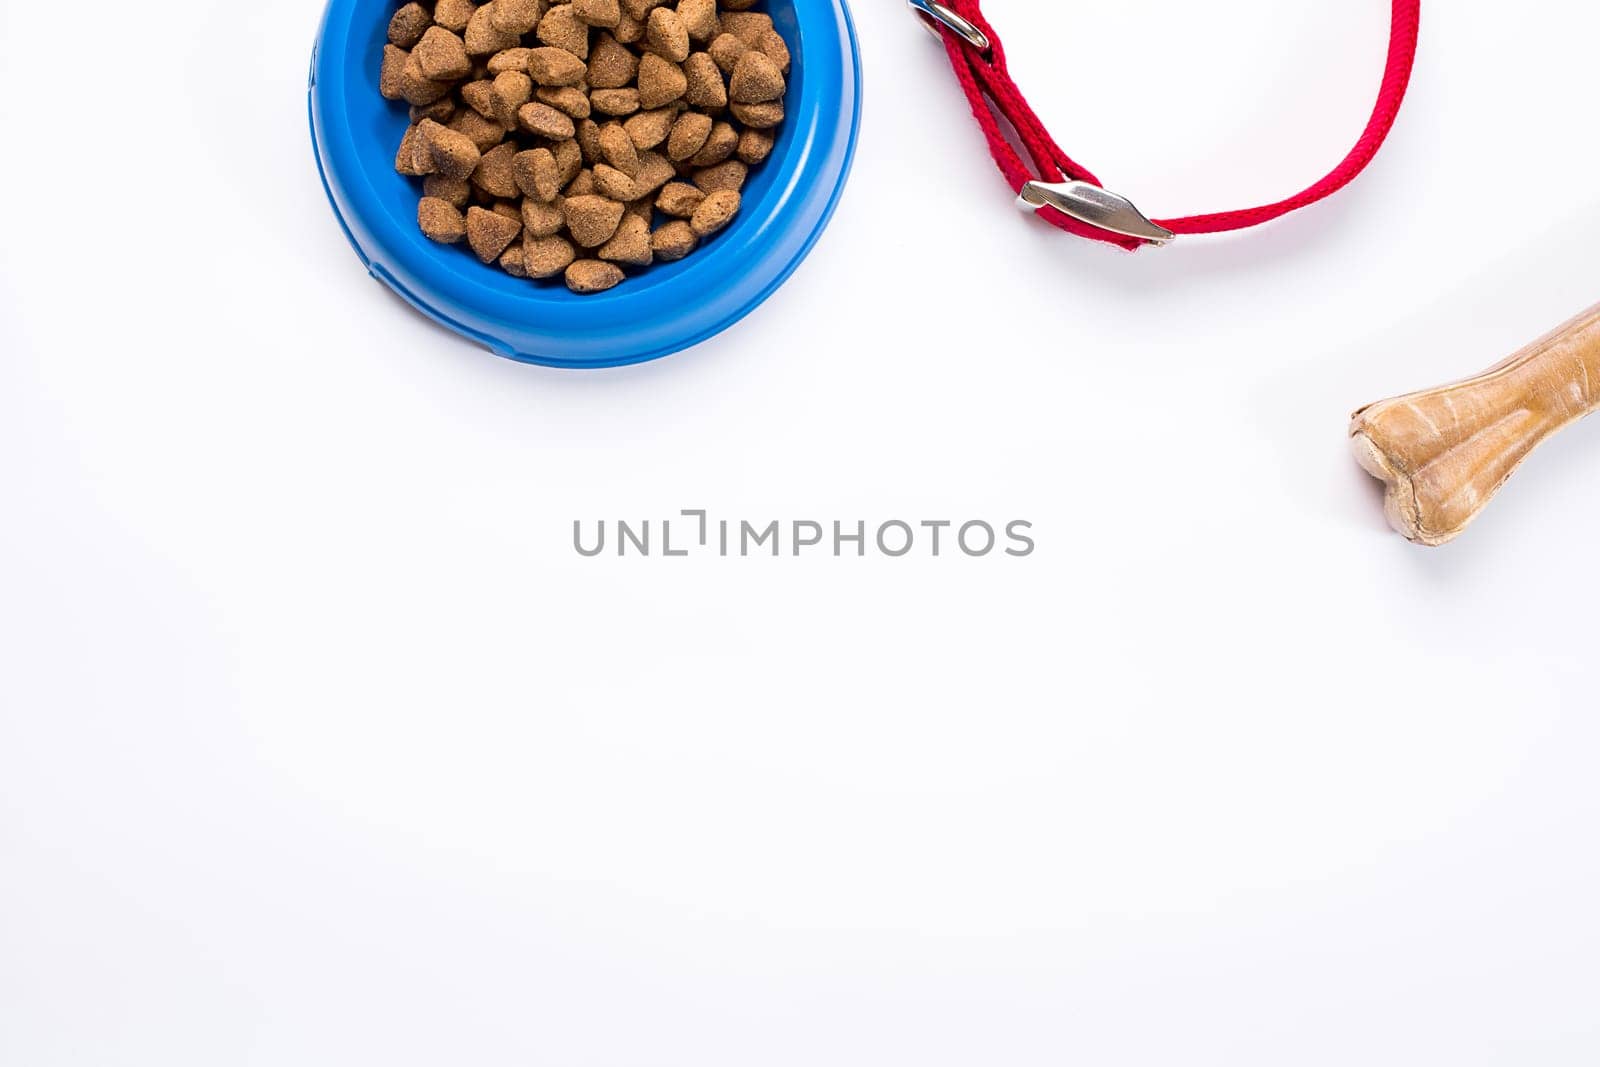 Collar, blue bowl with feed, leash and delicacy for dogs. Isolated on white background by nazarovsergey